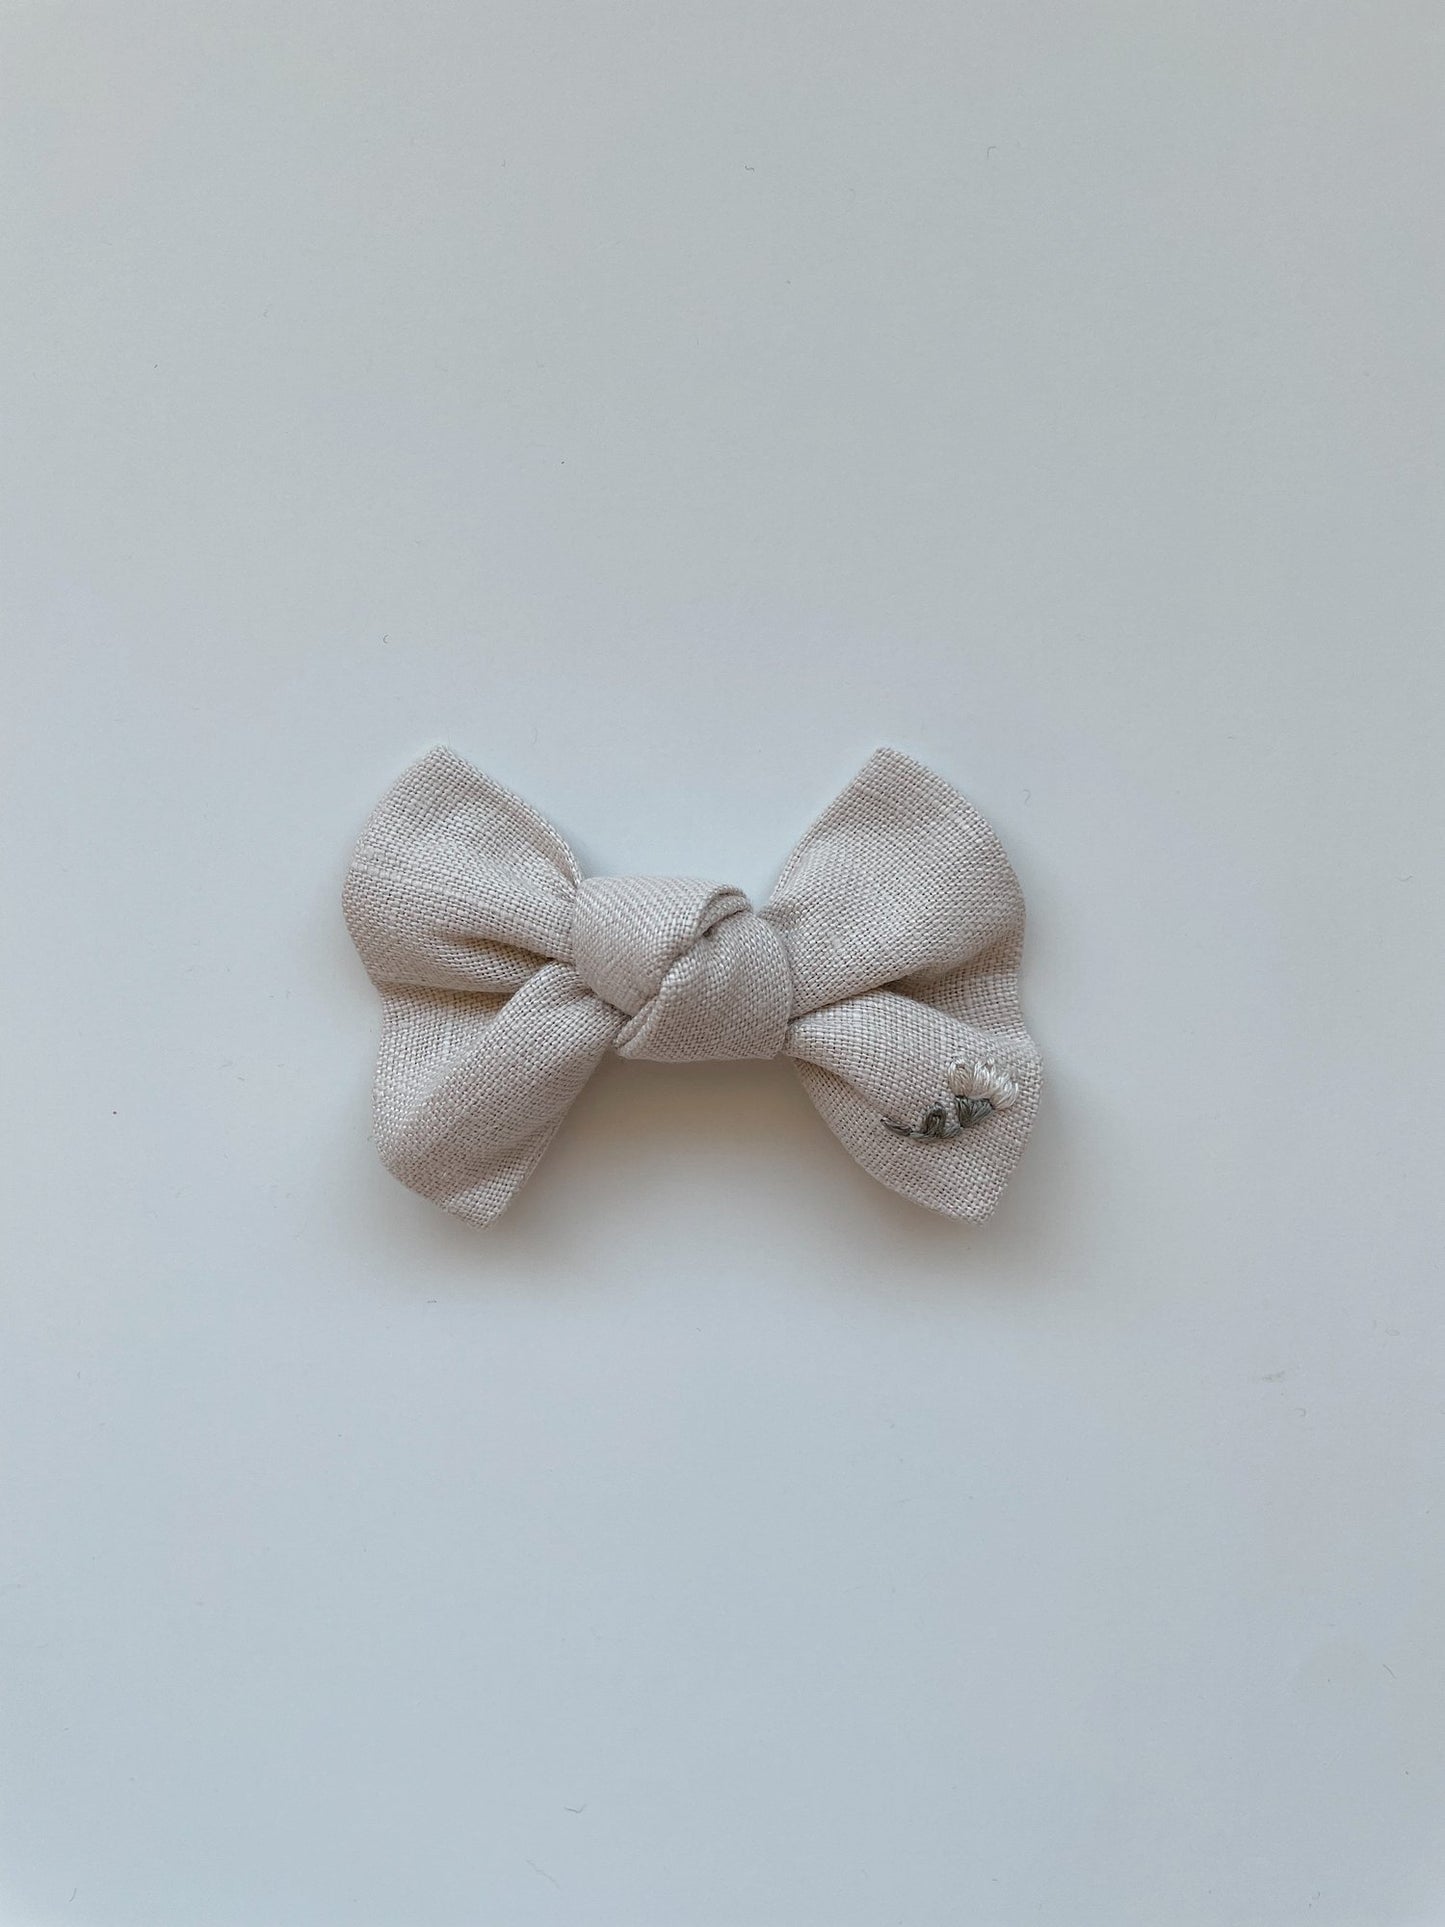 Handmade Petite Embroidered Bow - Natural